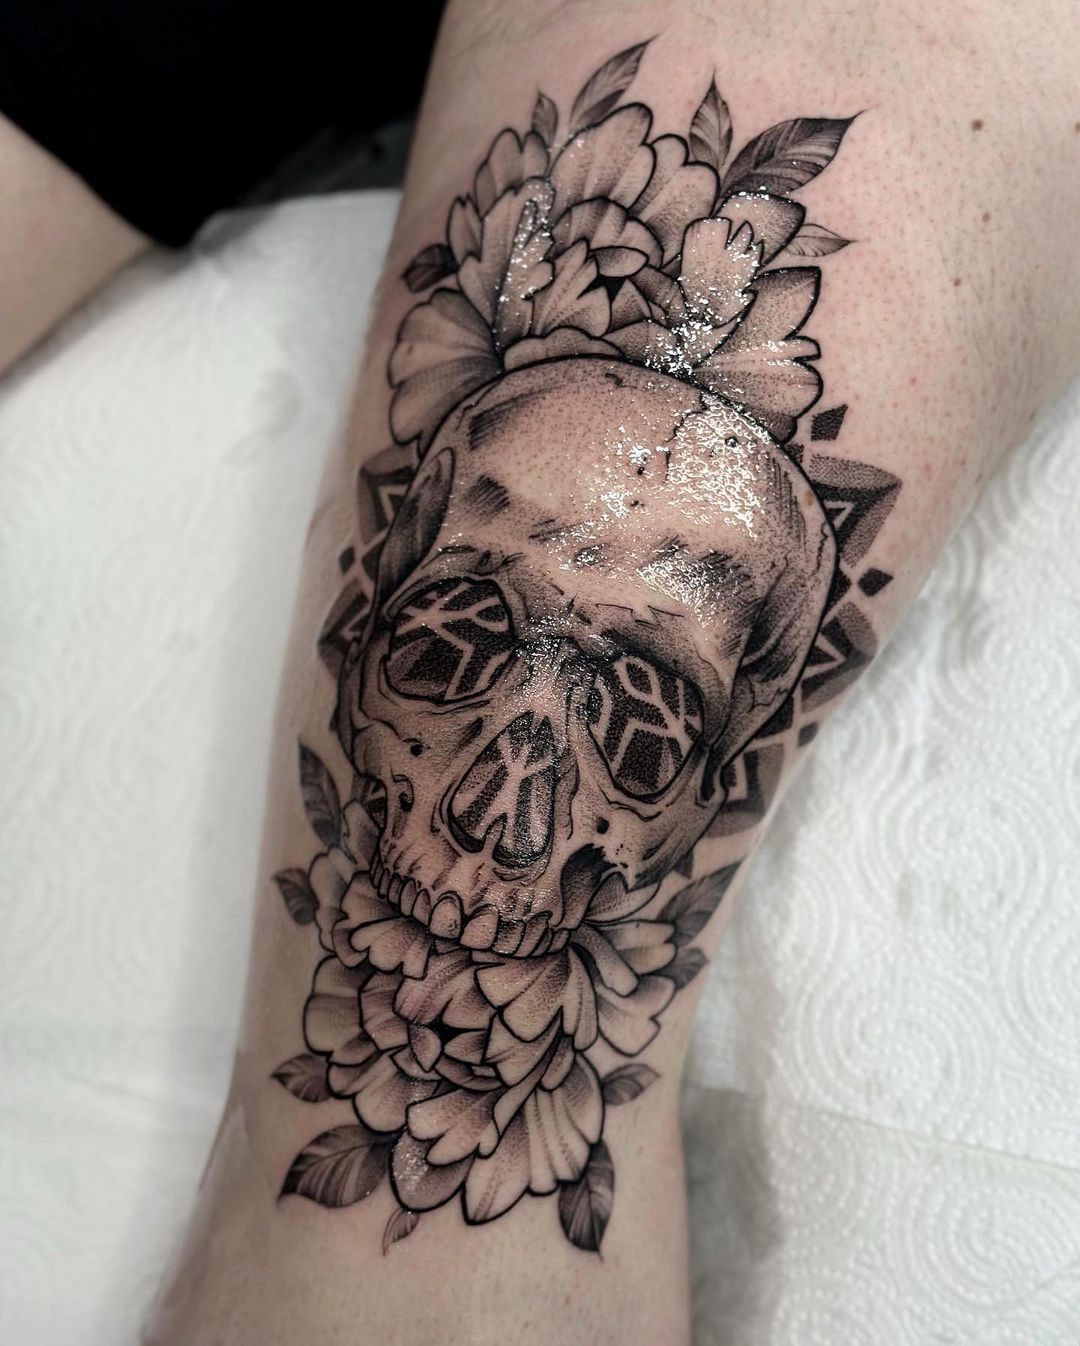 Stephen Frahm on Instagram Knee Capp tattoo She was a tuff cookie and  took it like a pro stencil skull skulltattoo skulltattoos lionskull  lionskulltattoo